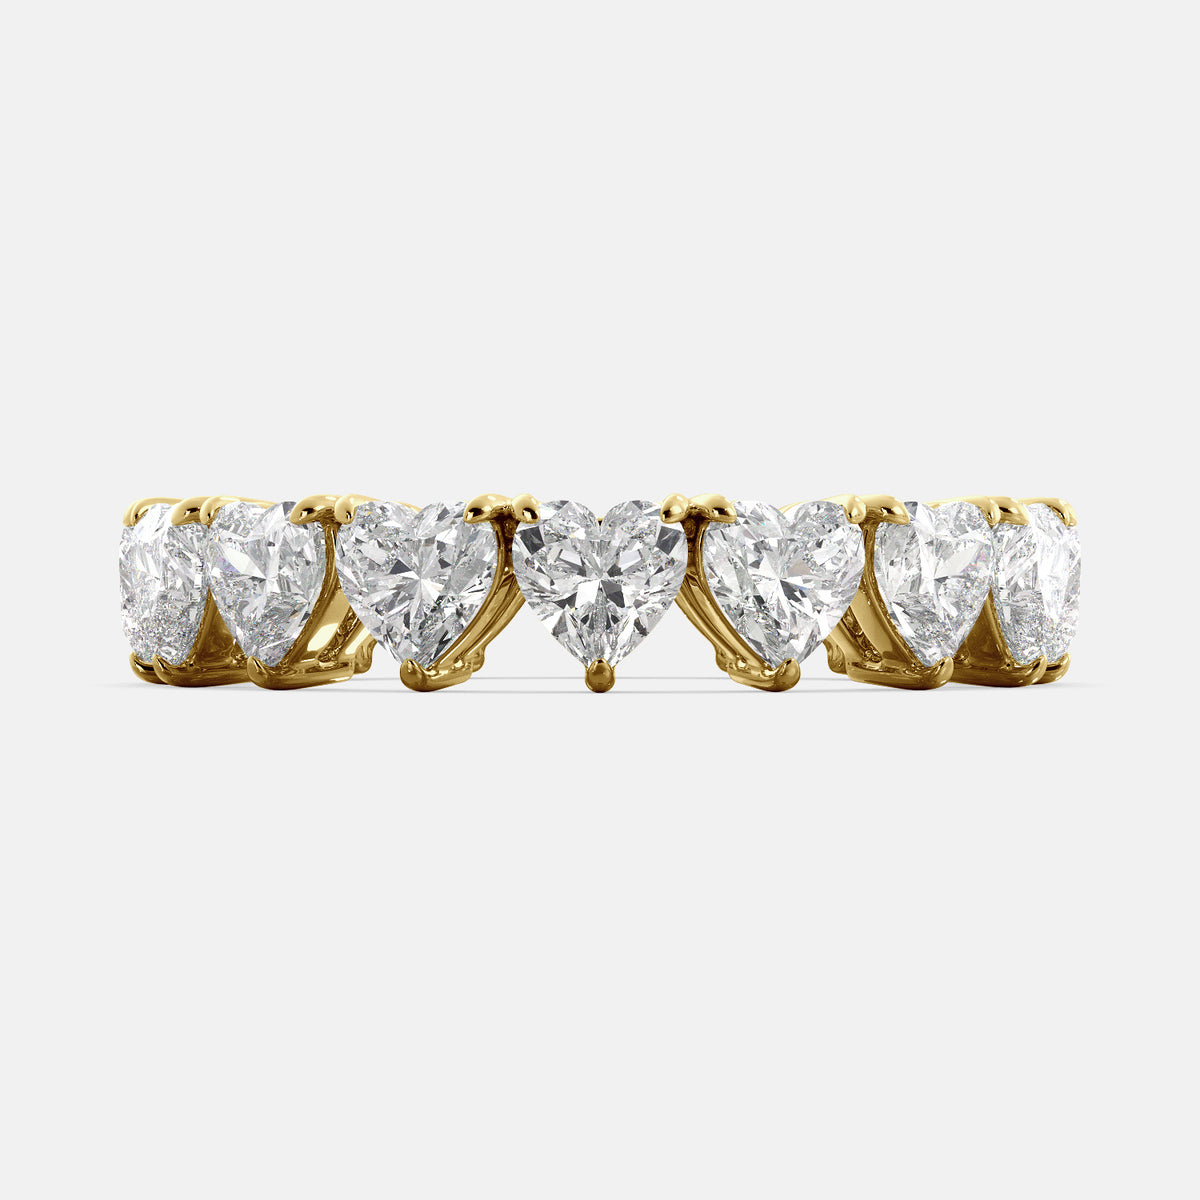 A close-up of a heart-shaped lab-grown diamond eternity wedding band in 14K yellow gold. The band is set with heart shape brilliant diamonds that sparkle and shine. The band is a beautiful and unique choice for a wedding band.